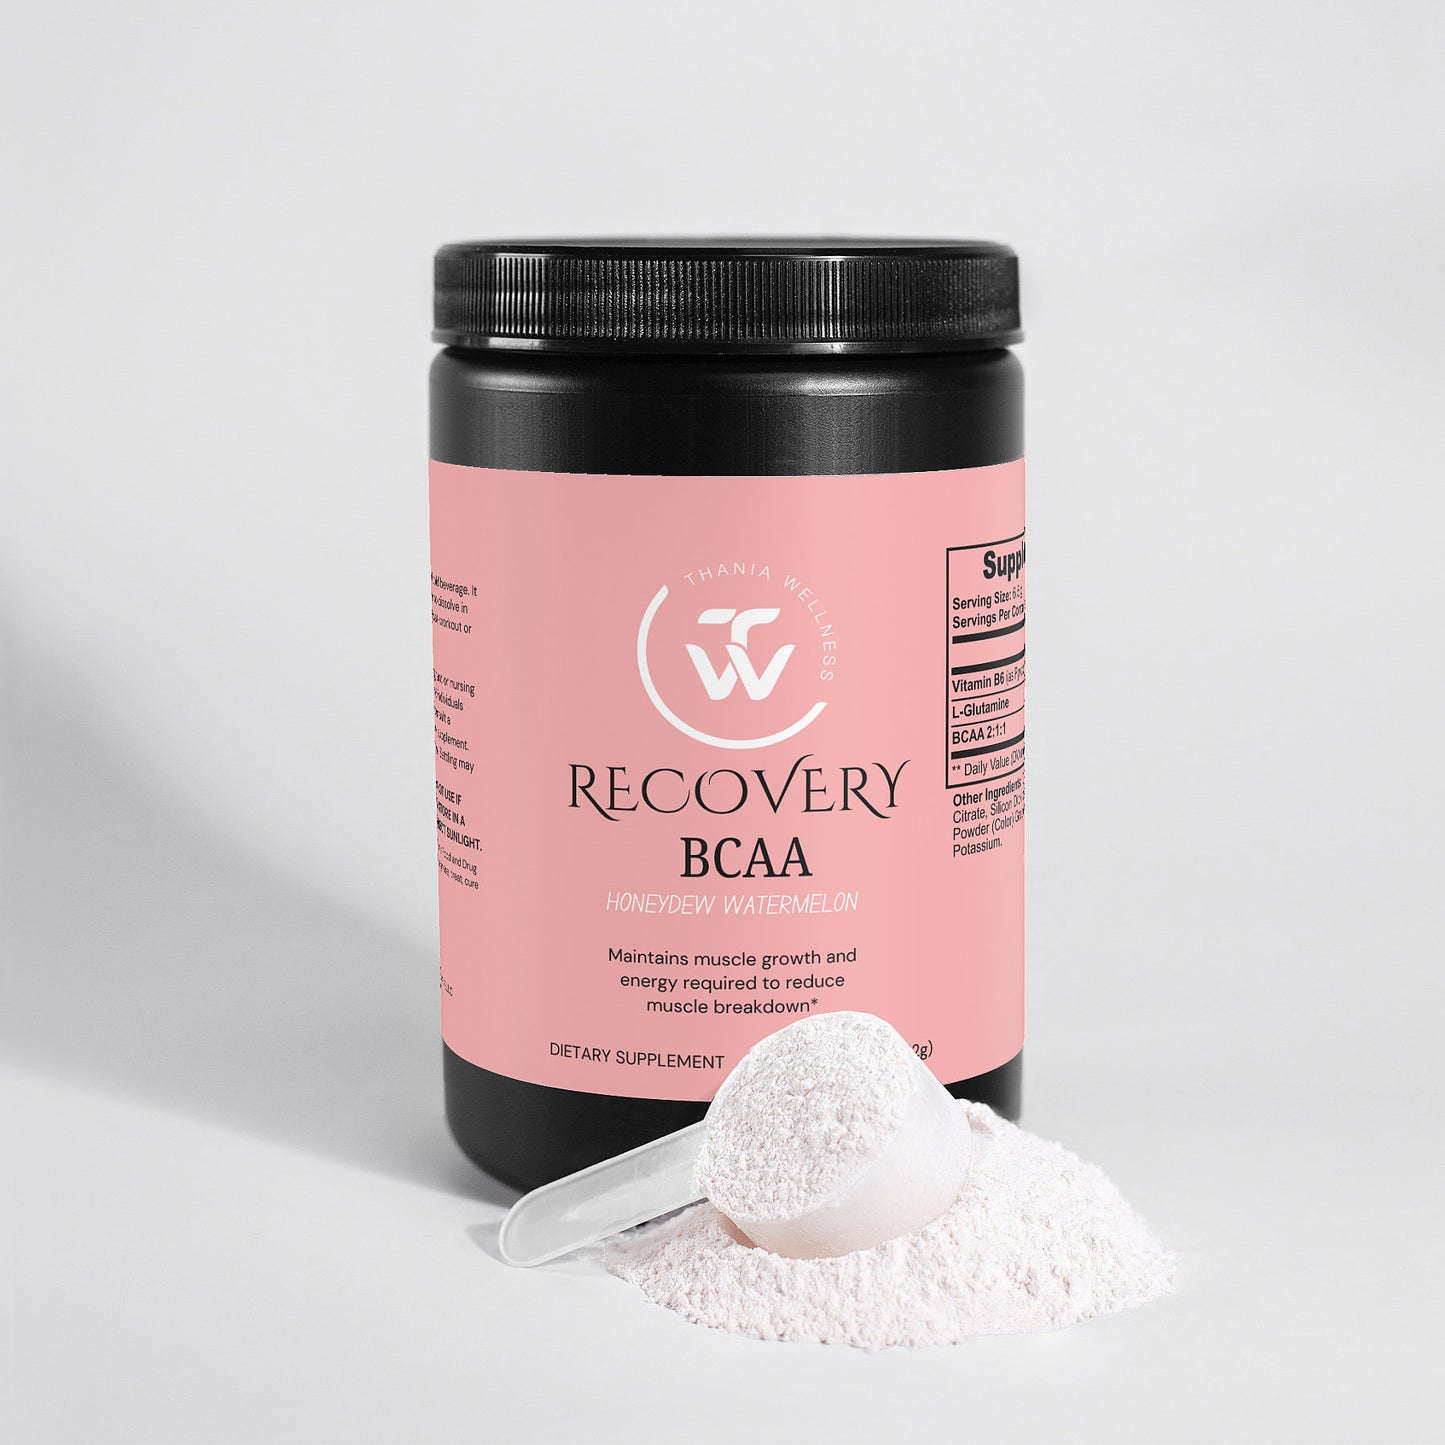 BCAA Recover